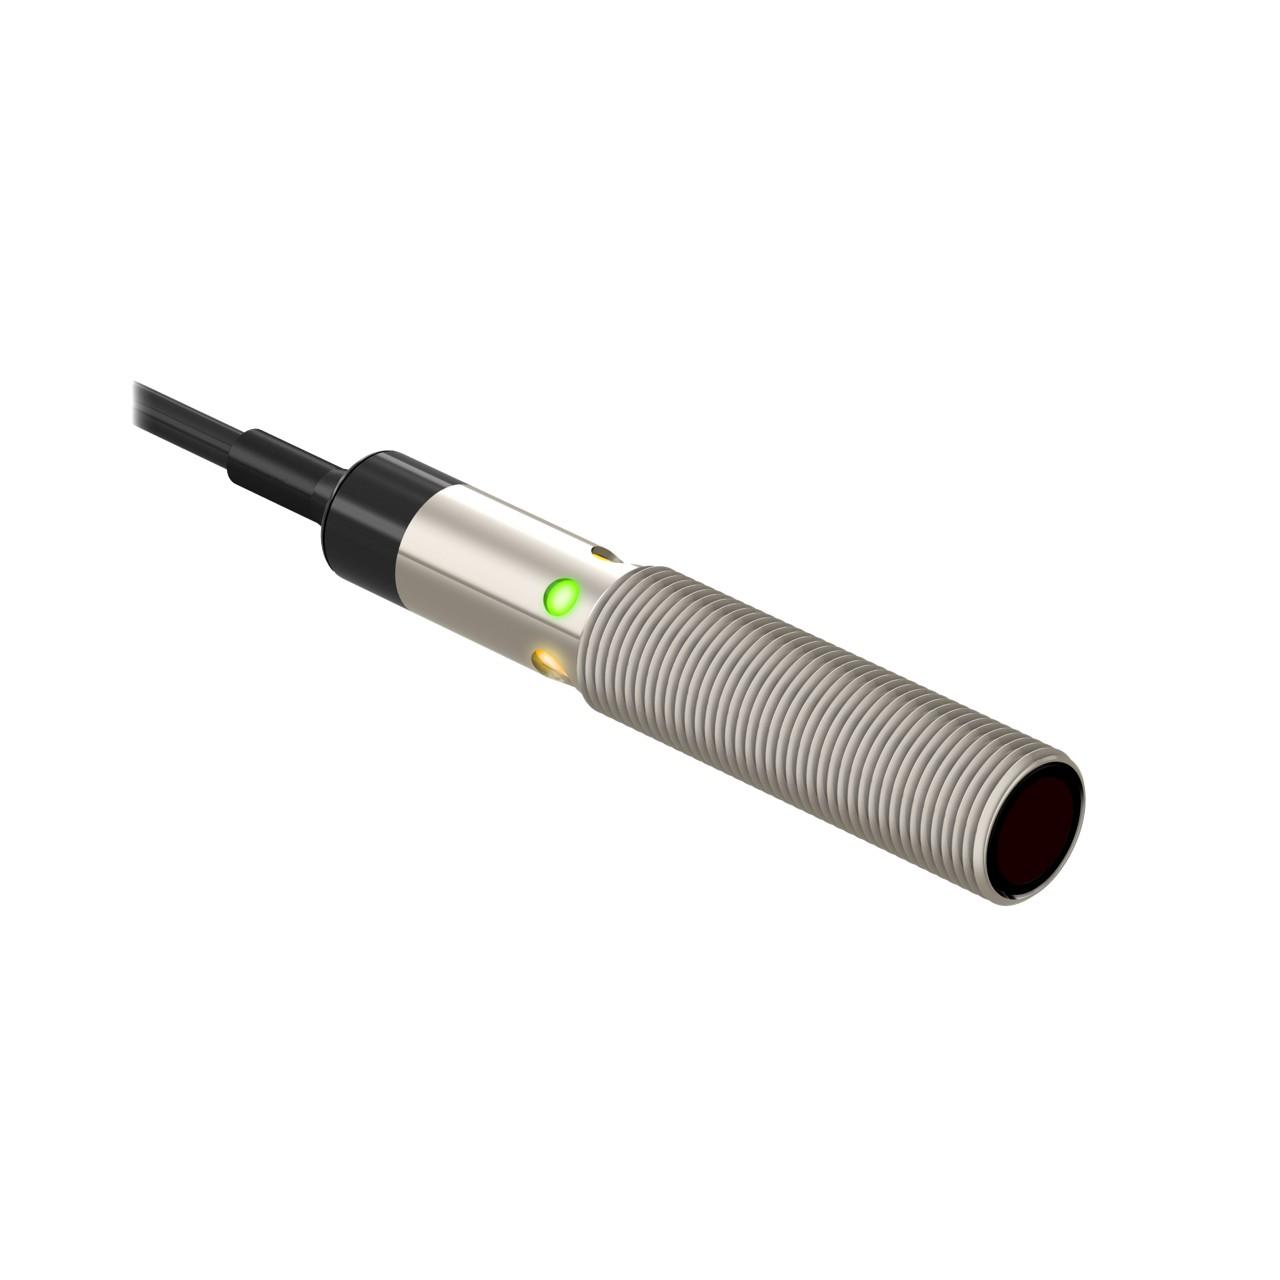 Banner M12EQ5 Photo-electric emitter with through-beam system / opposed mode - Banner Engineering (M12 barrel series - M12) - Part #78250 - Visible red light (660nm) - Supply voltage 10Vdc-30Vdc (12Vdc / 24Vdc nom.) - Pre-wired with 6" / 150mm pigtail terminated with 4